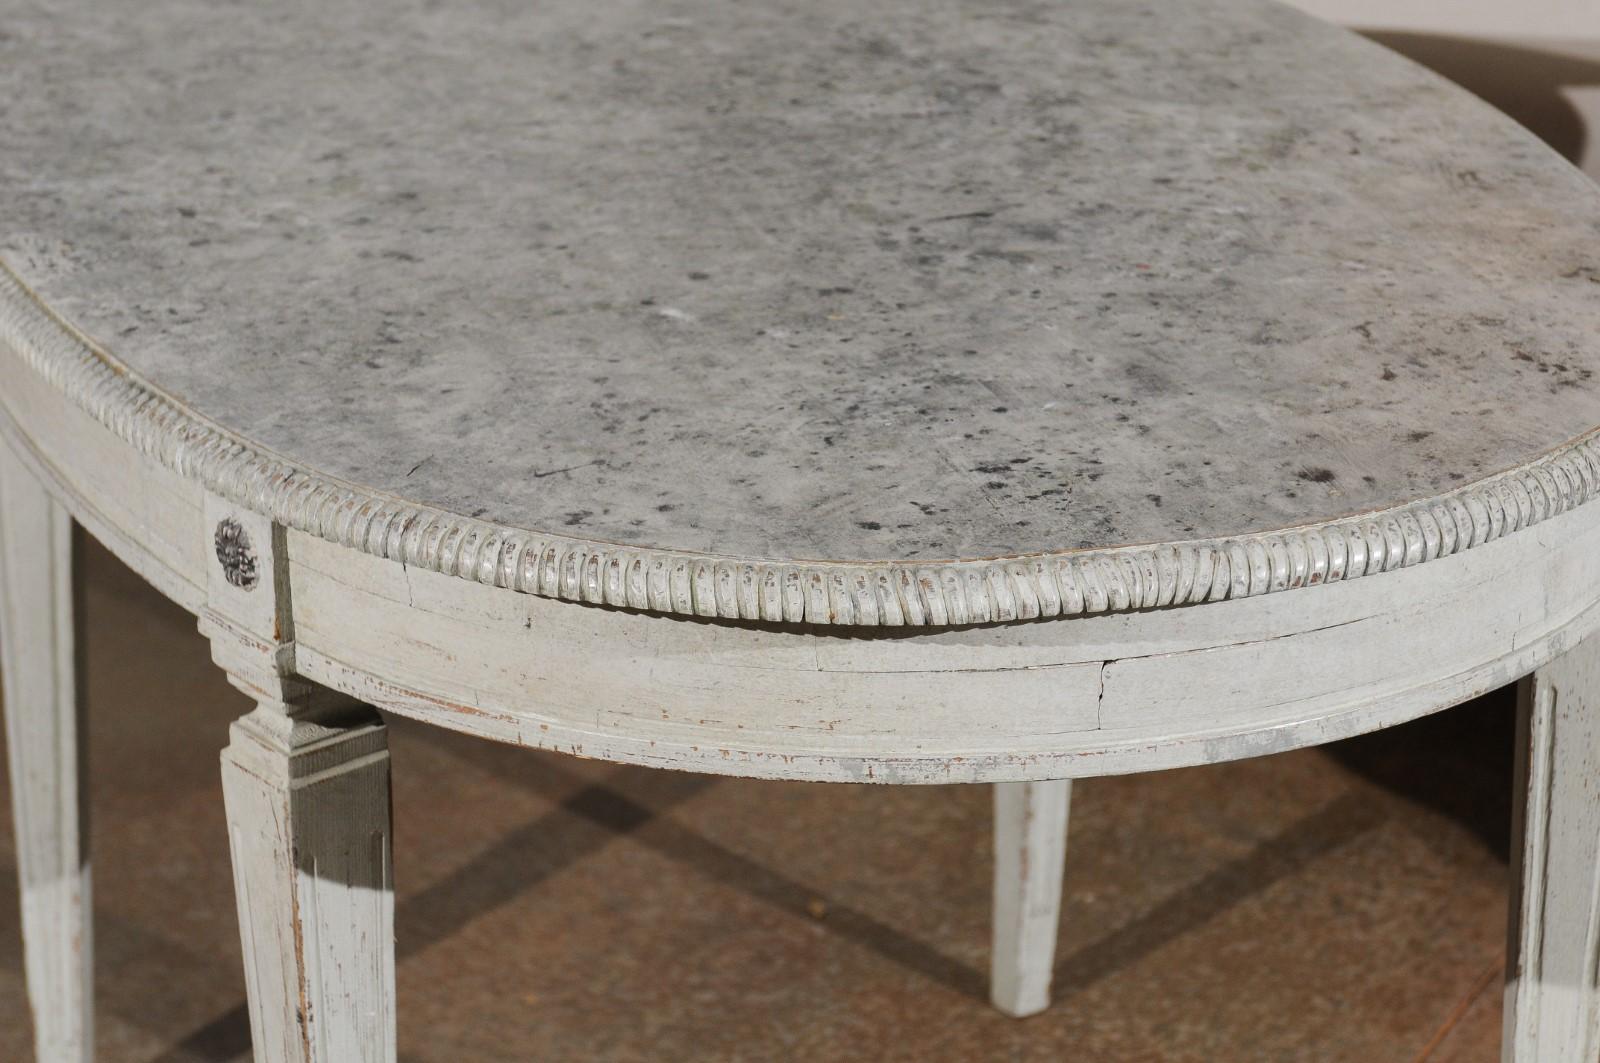 Wood Swedish Gustavian Style Grey Painted Table with Marbleized Oval Top, circa 1880